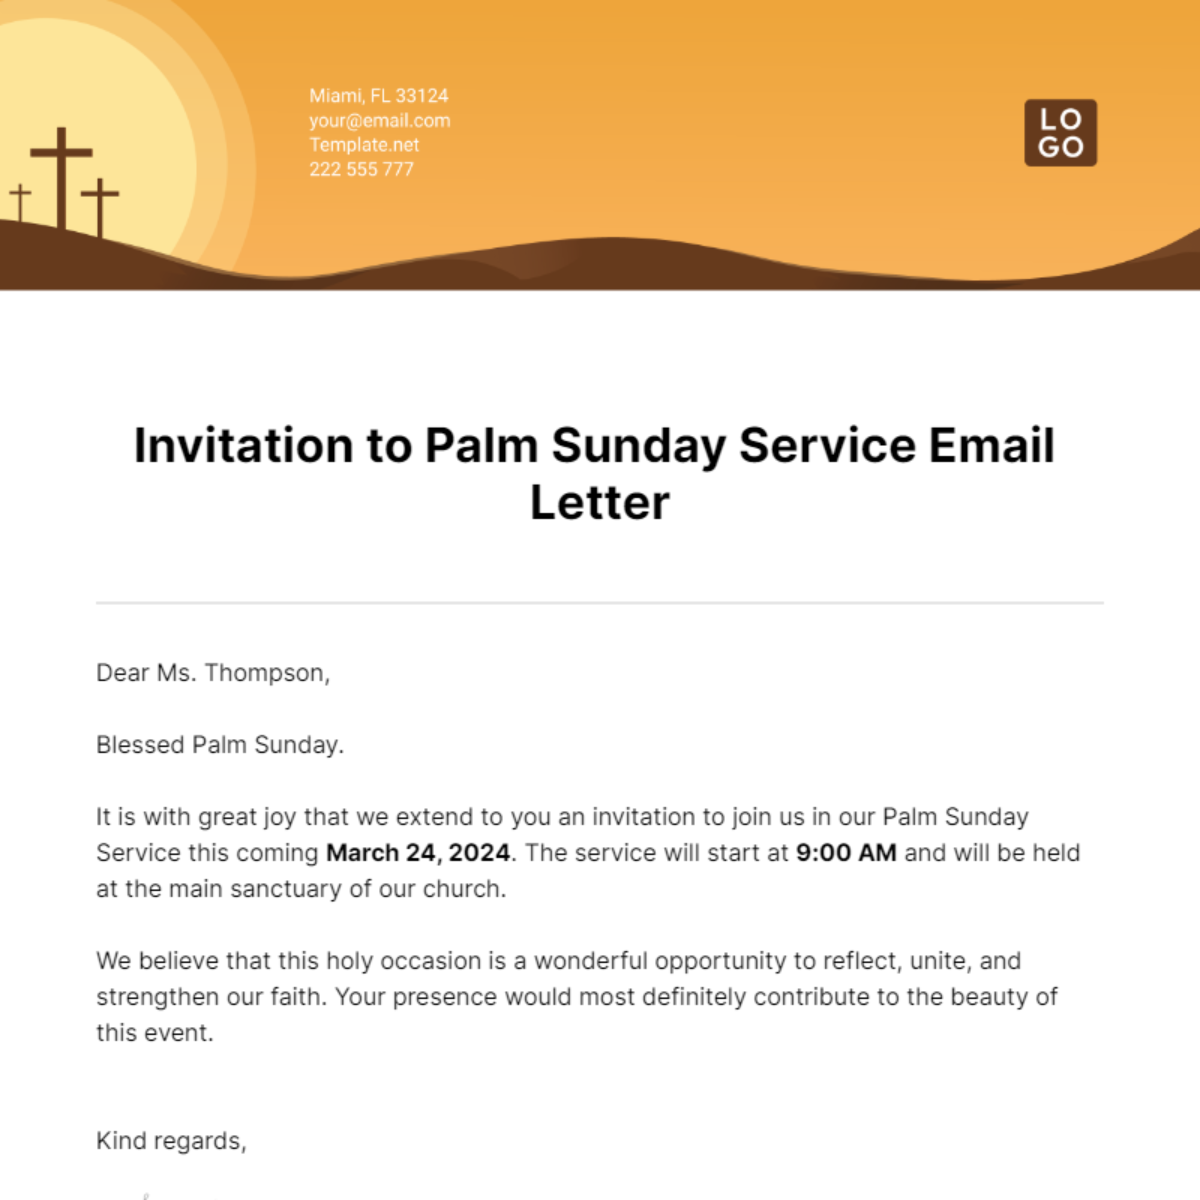 Invitation to Palm Sunday Service Email Letter Template